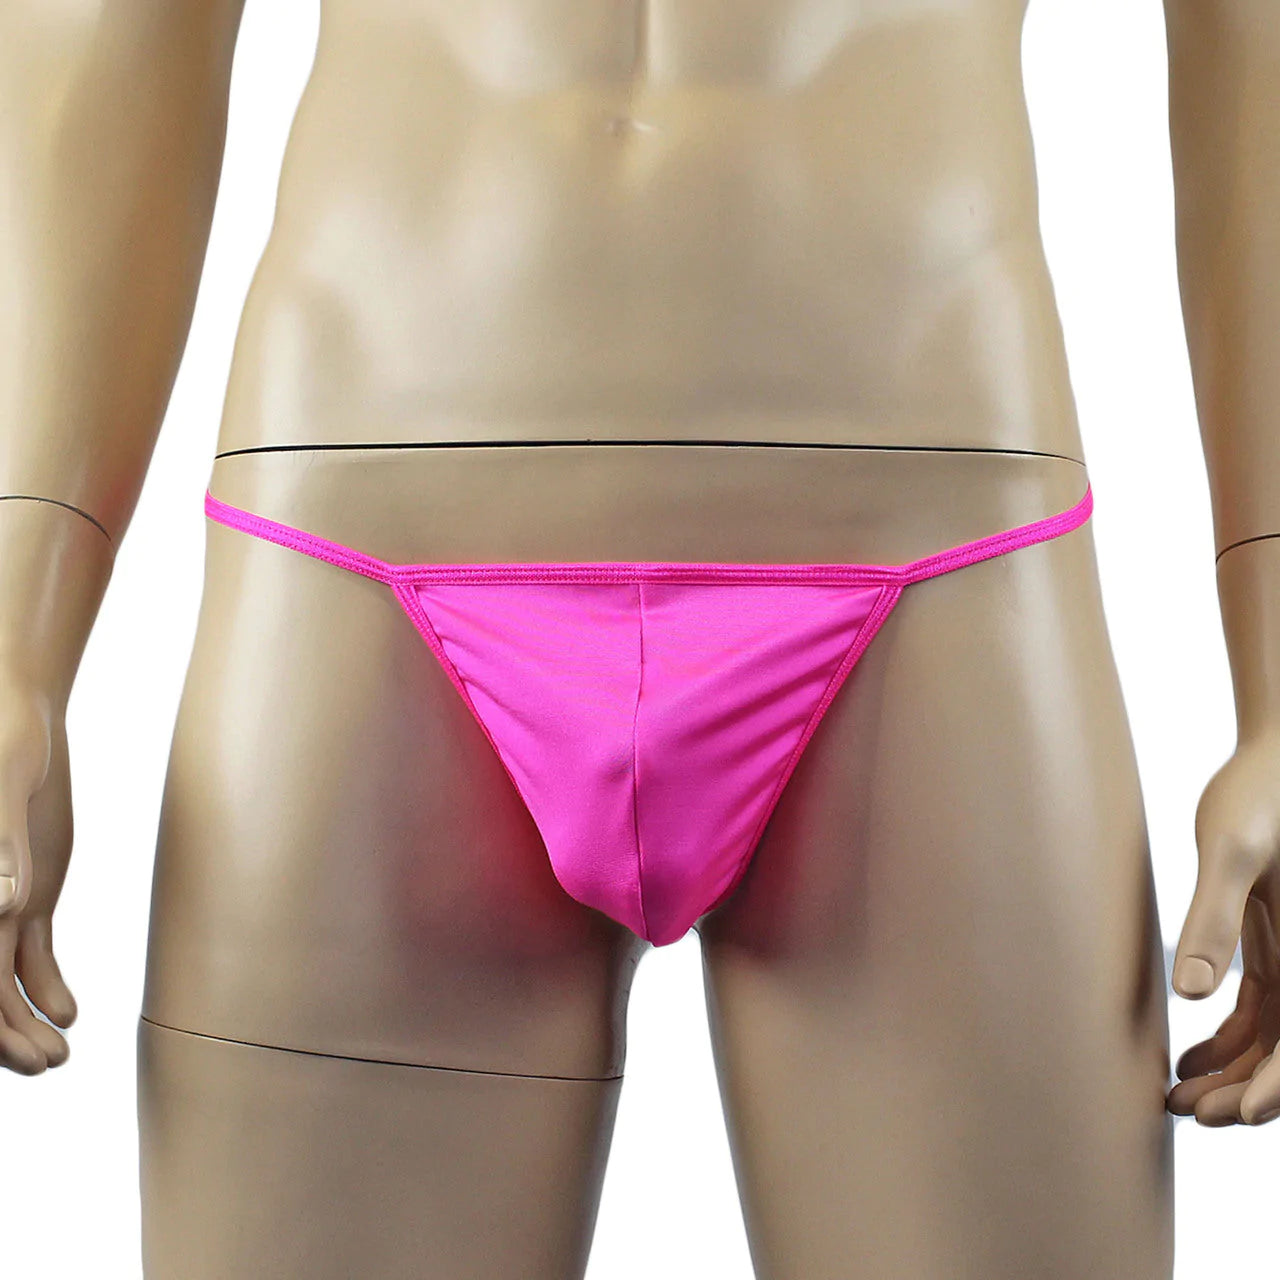 SALE - Mens Mick Keep It Simple Spandex Pouch G string with Thin Elastic Hot Pink